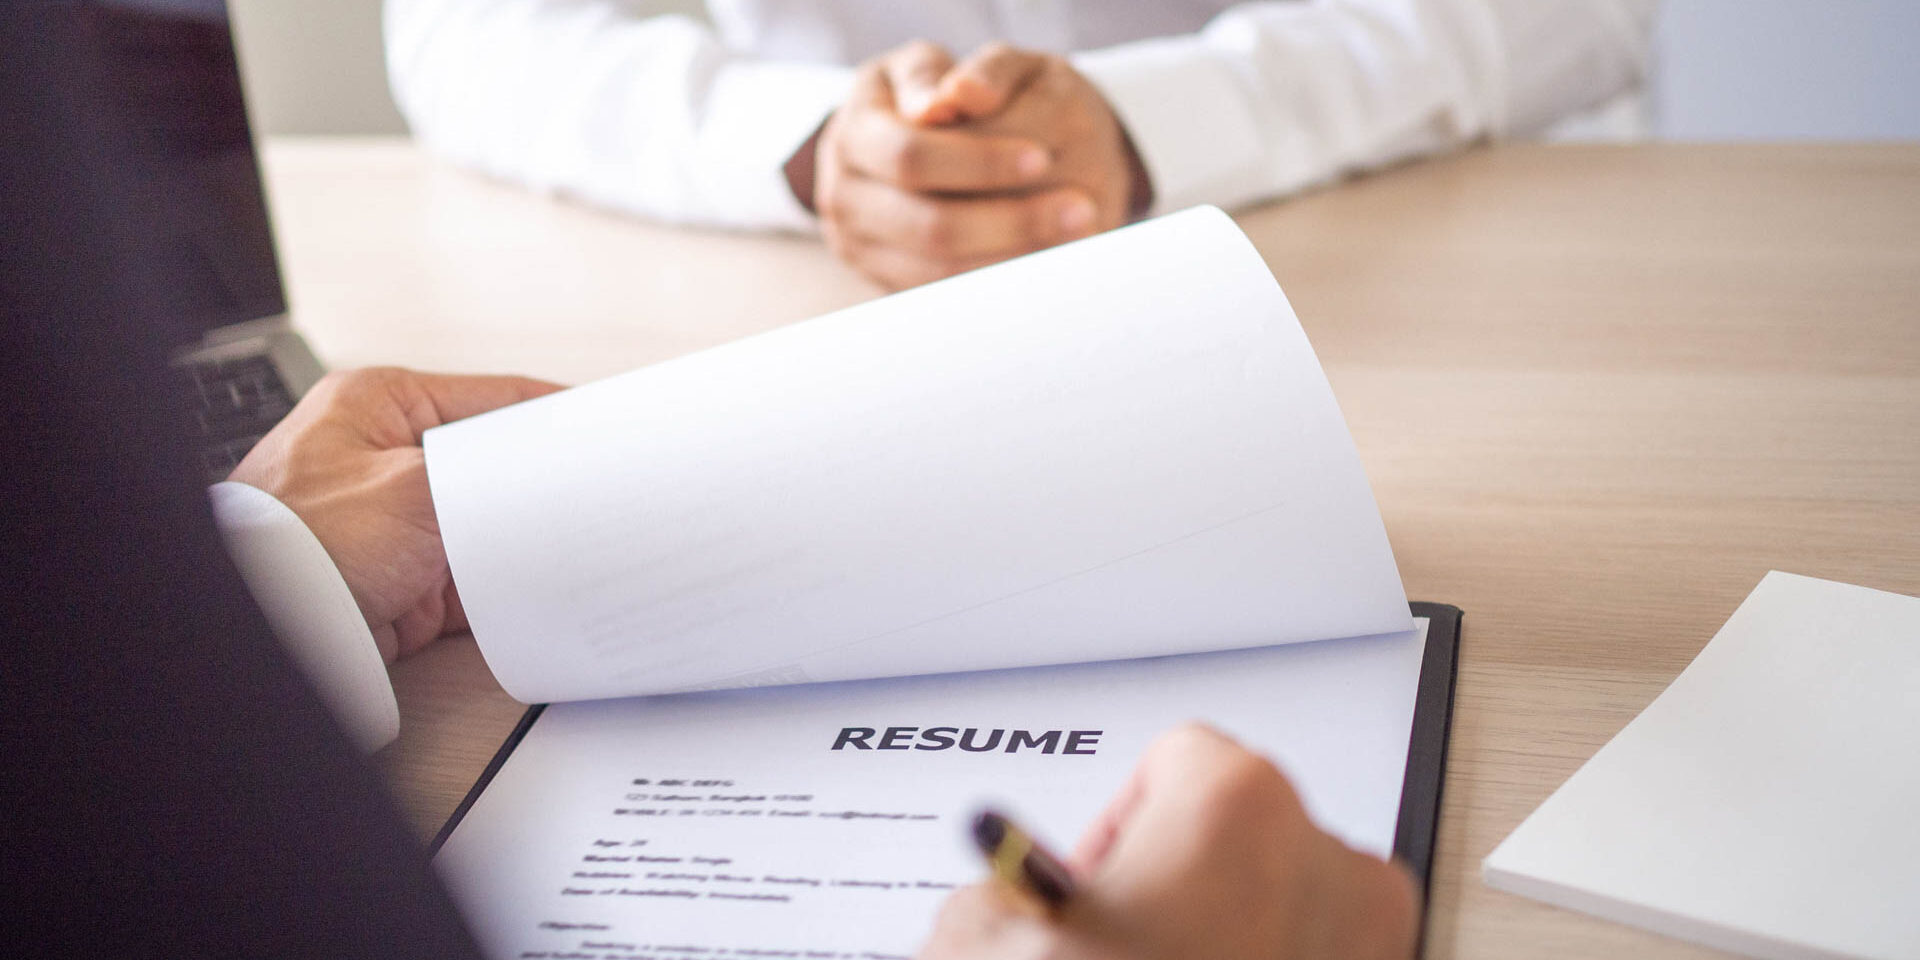 how to write community service on resume